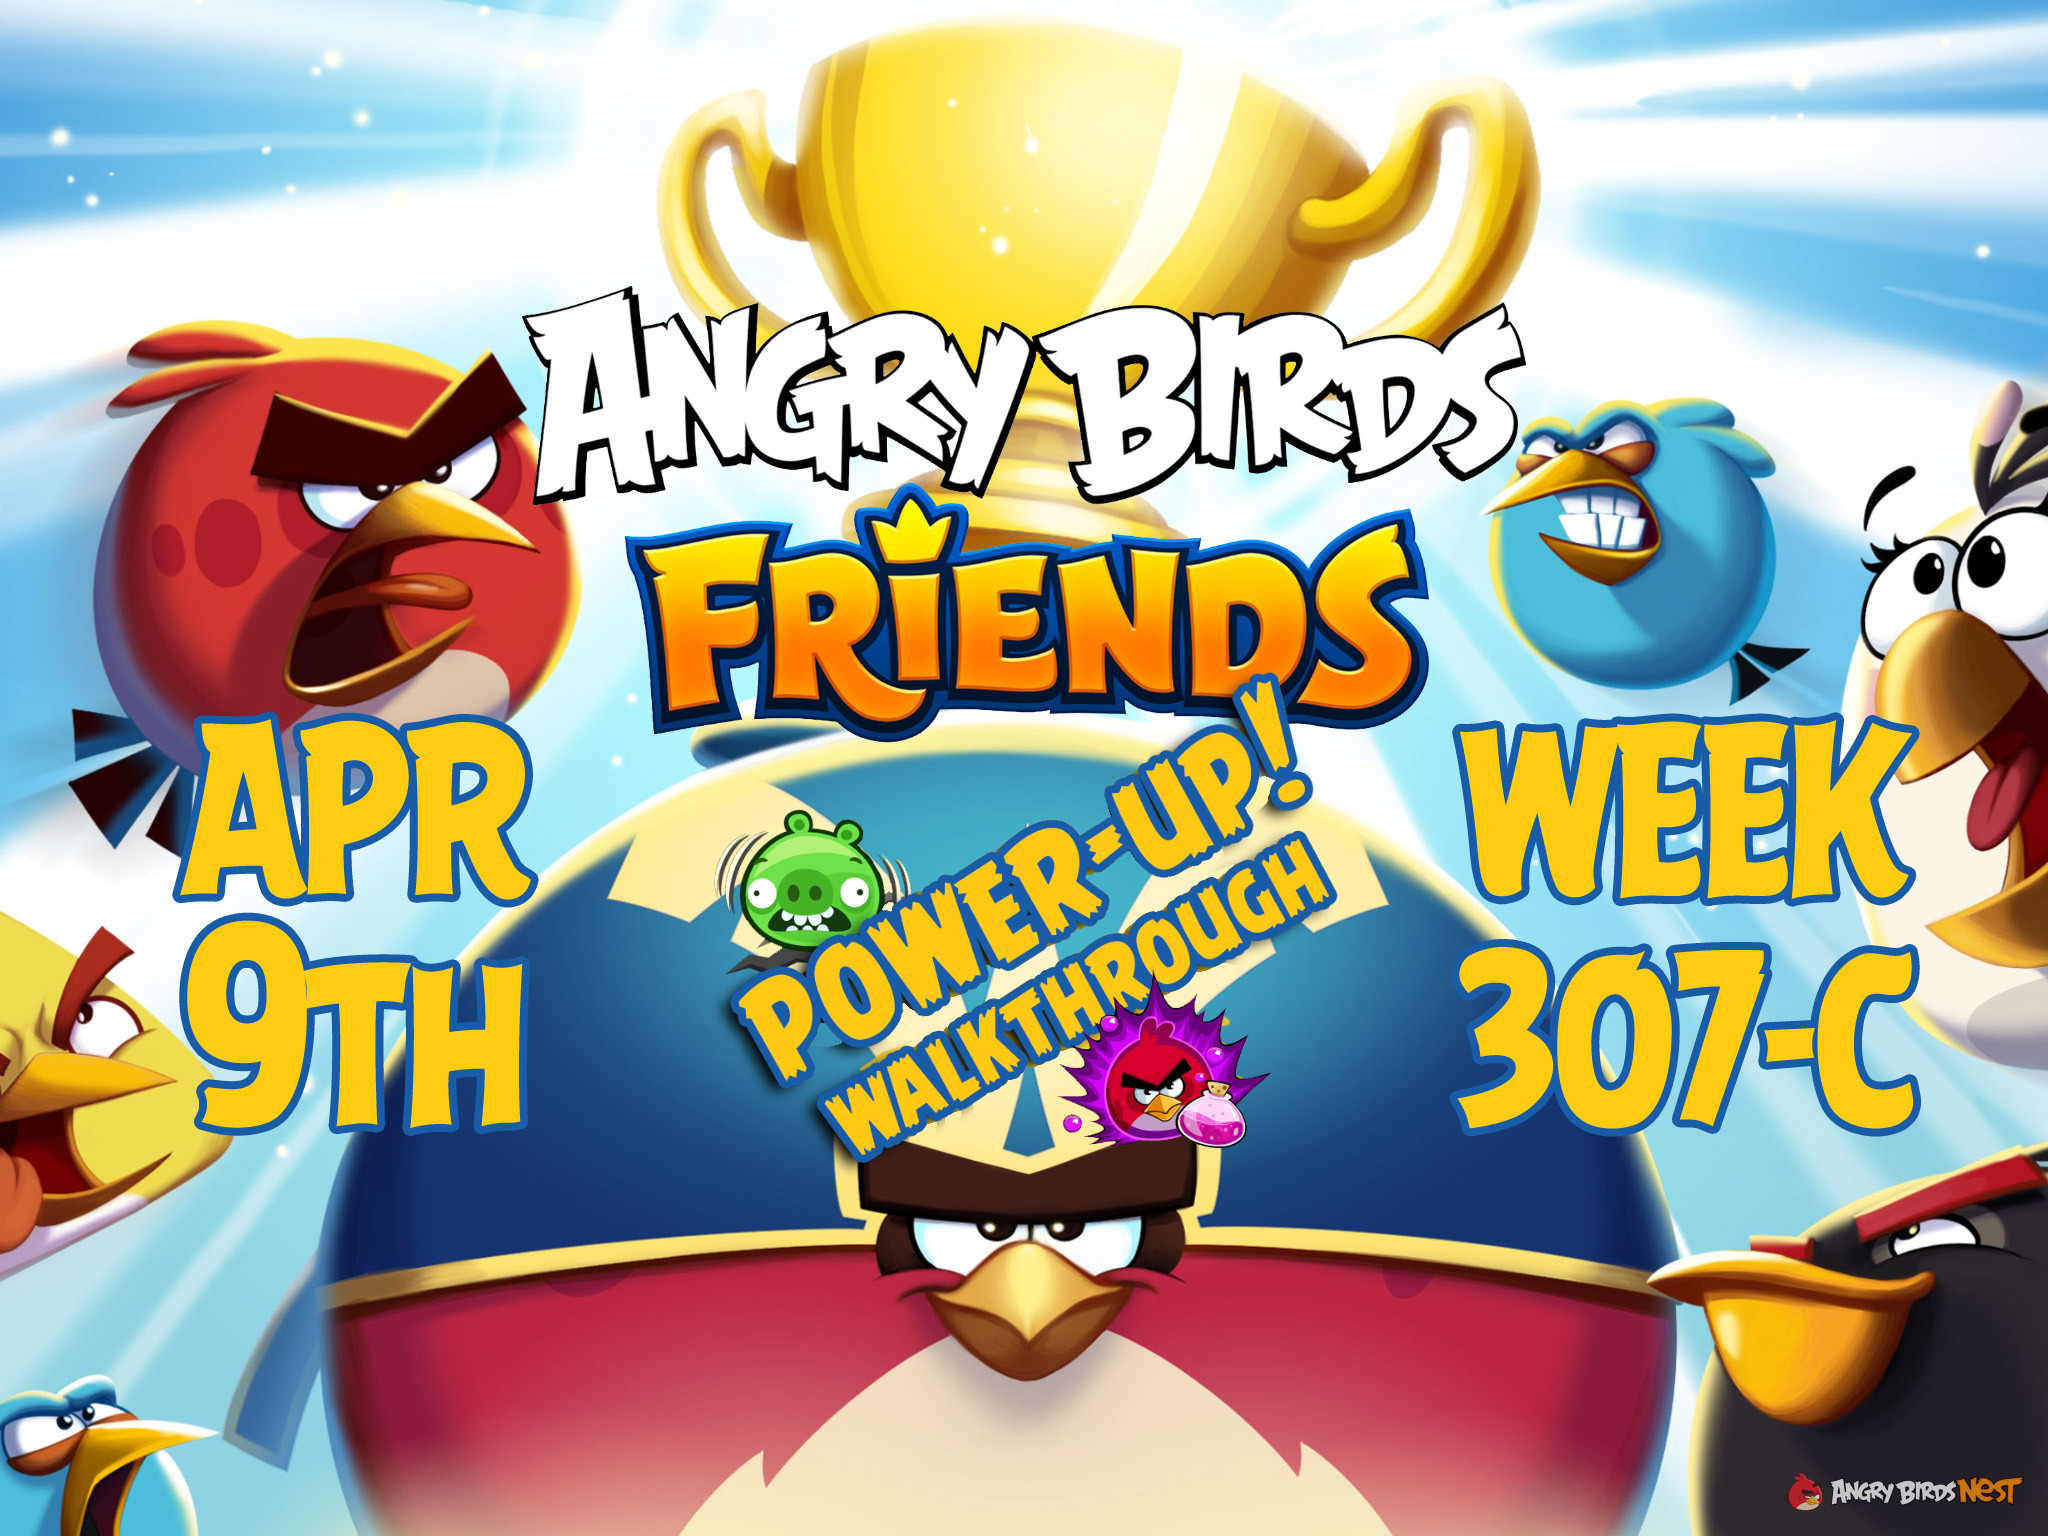 Angry Birds Friends Tournament Week 307-C Feature Image PU